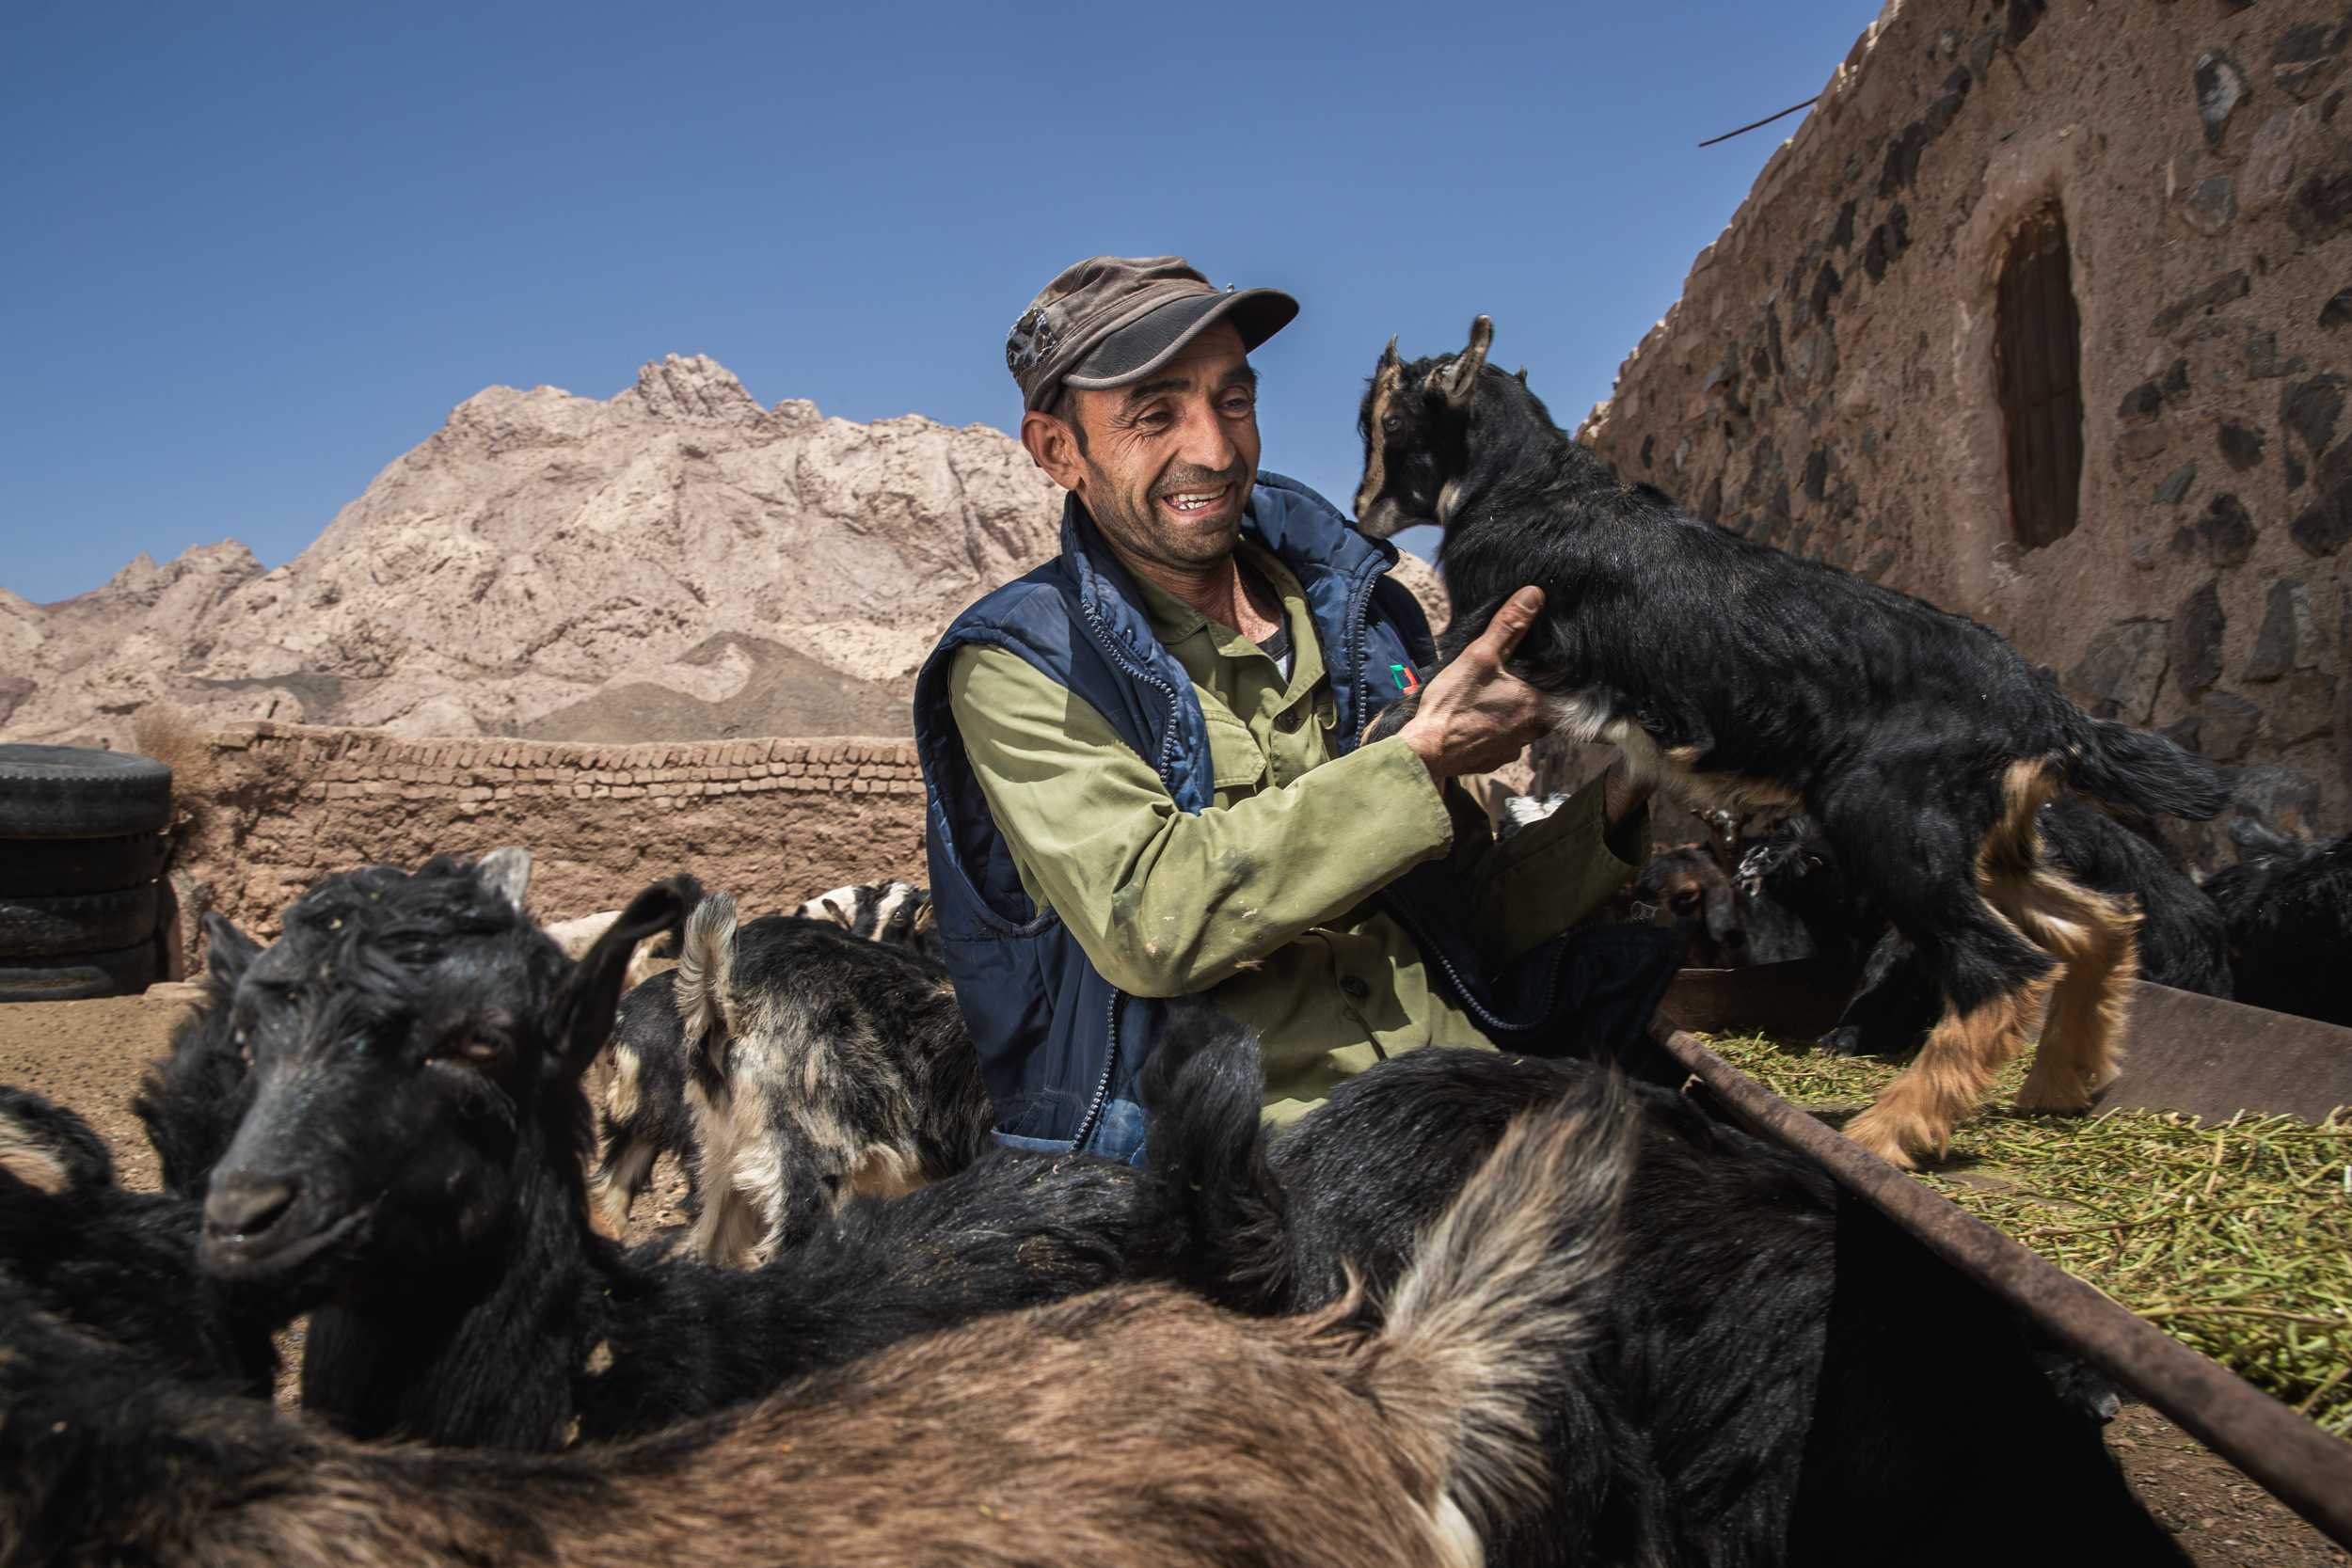 A farmer in central Iran taking care of his goats